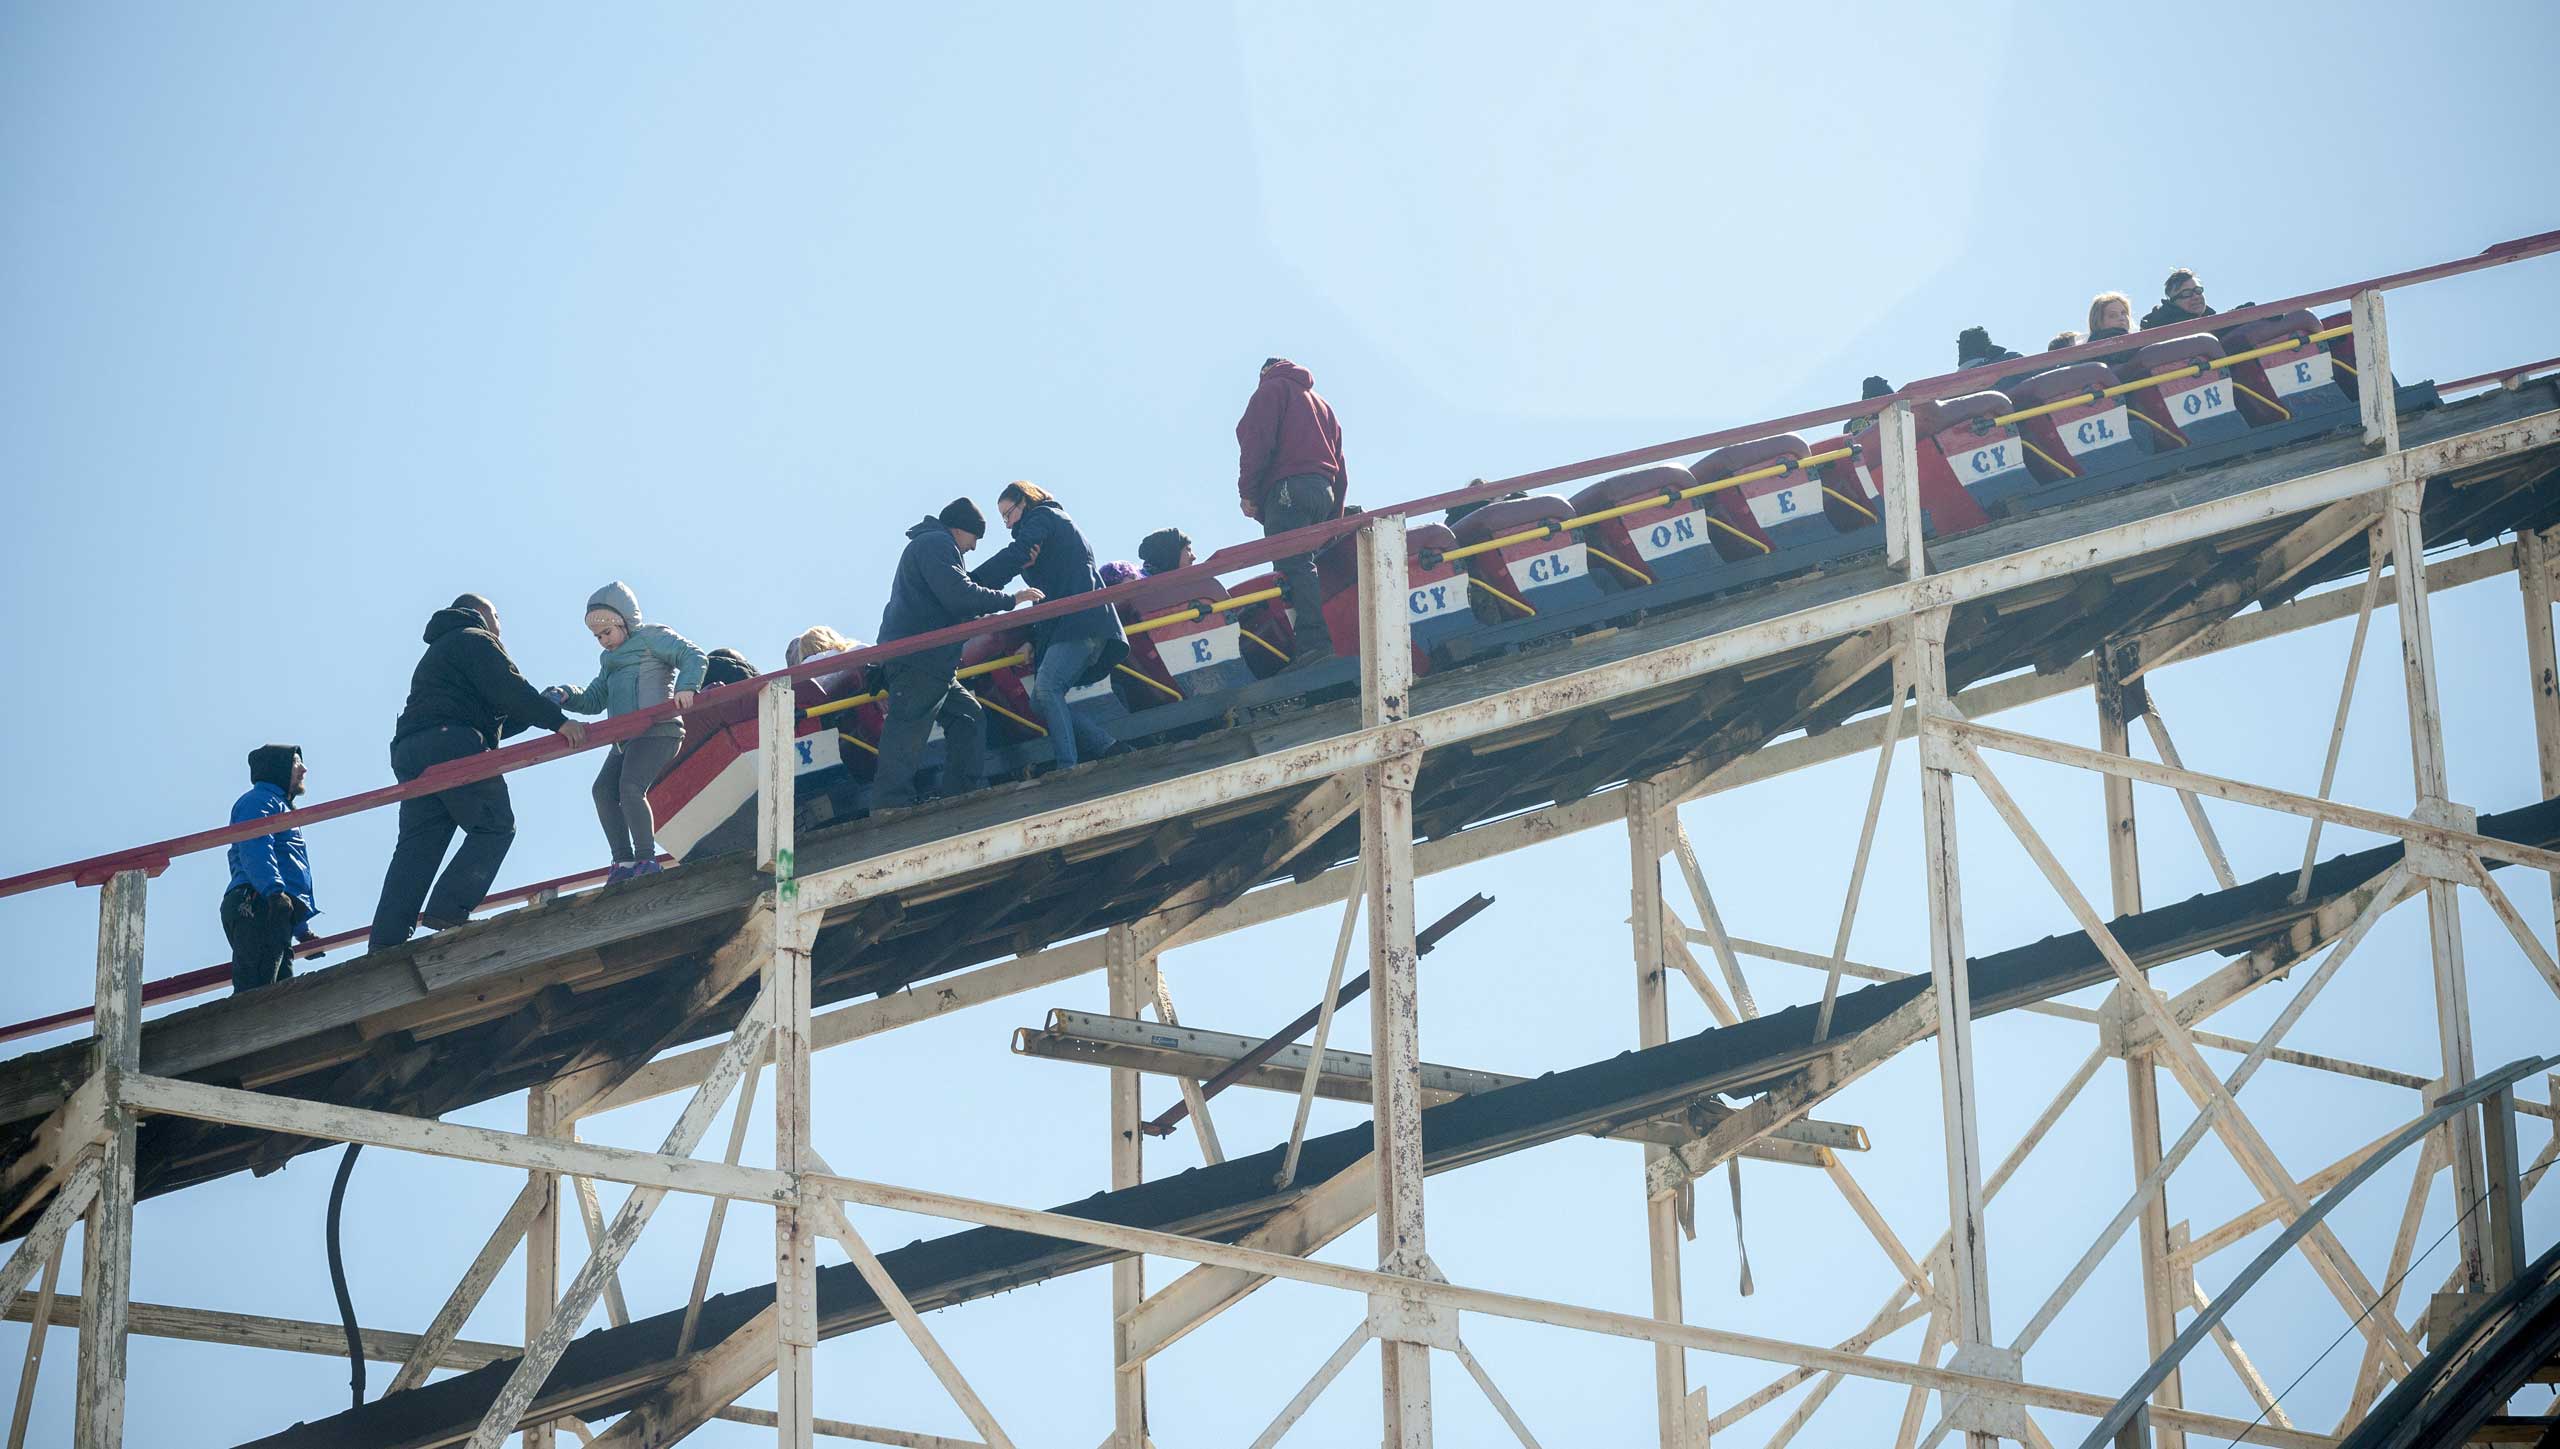 Workers assist thrill seekers on the Luna Park Coney Island Cyclone roller coaster after it got stuck on its inaugural run of the Summer 2015 season, on March 29, 2015 in Brooklyn, N.Y. (Richard Levine—Demotix/Corbis)